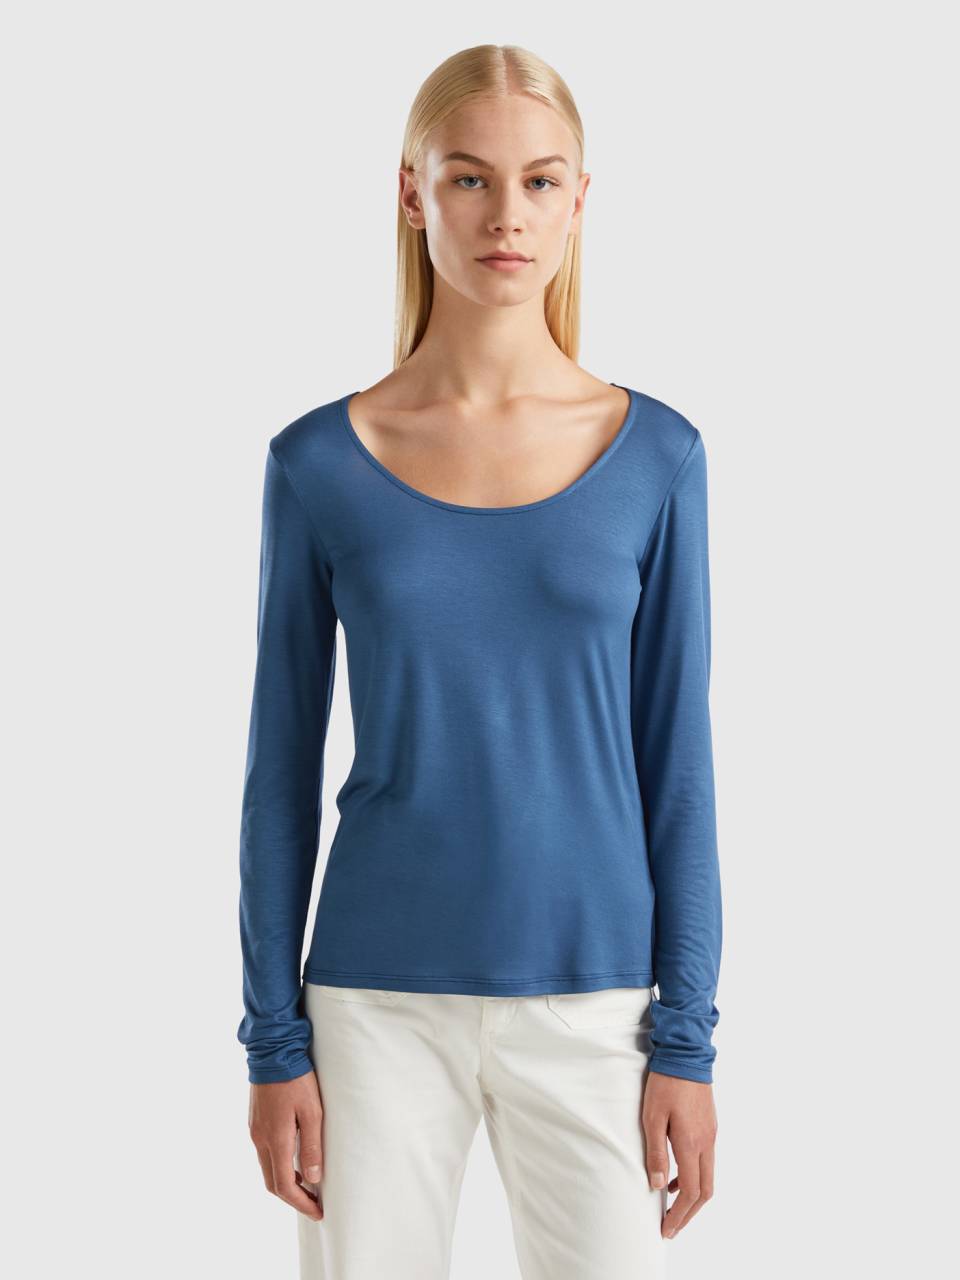 T-shirt in sustainable stretch Blue | Force Benetton viscose - Air